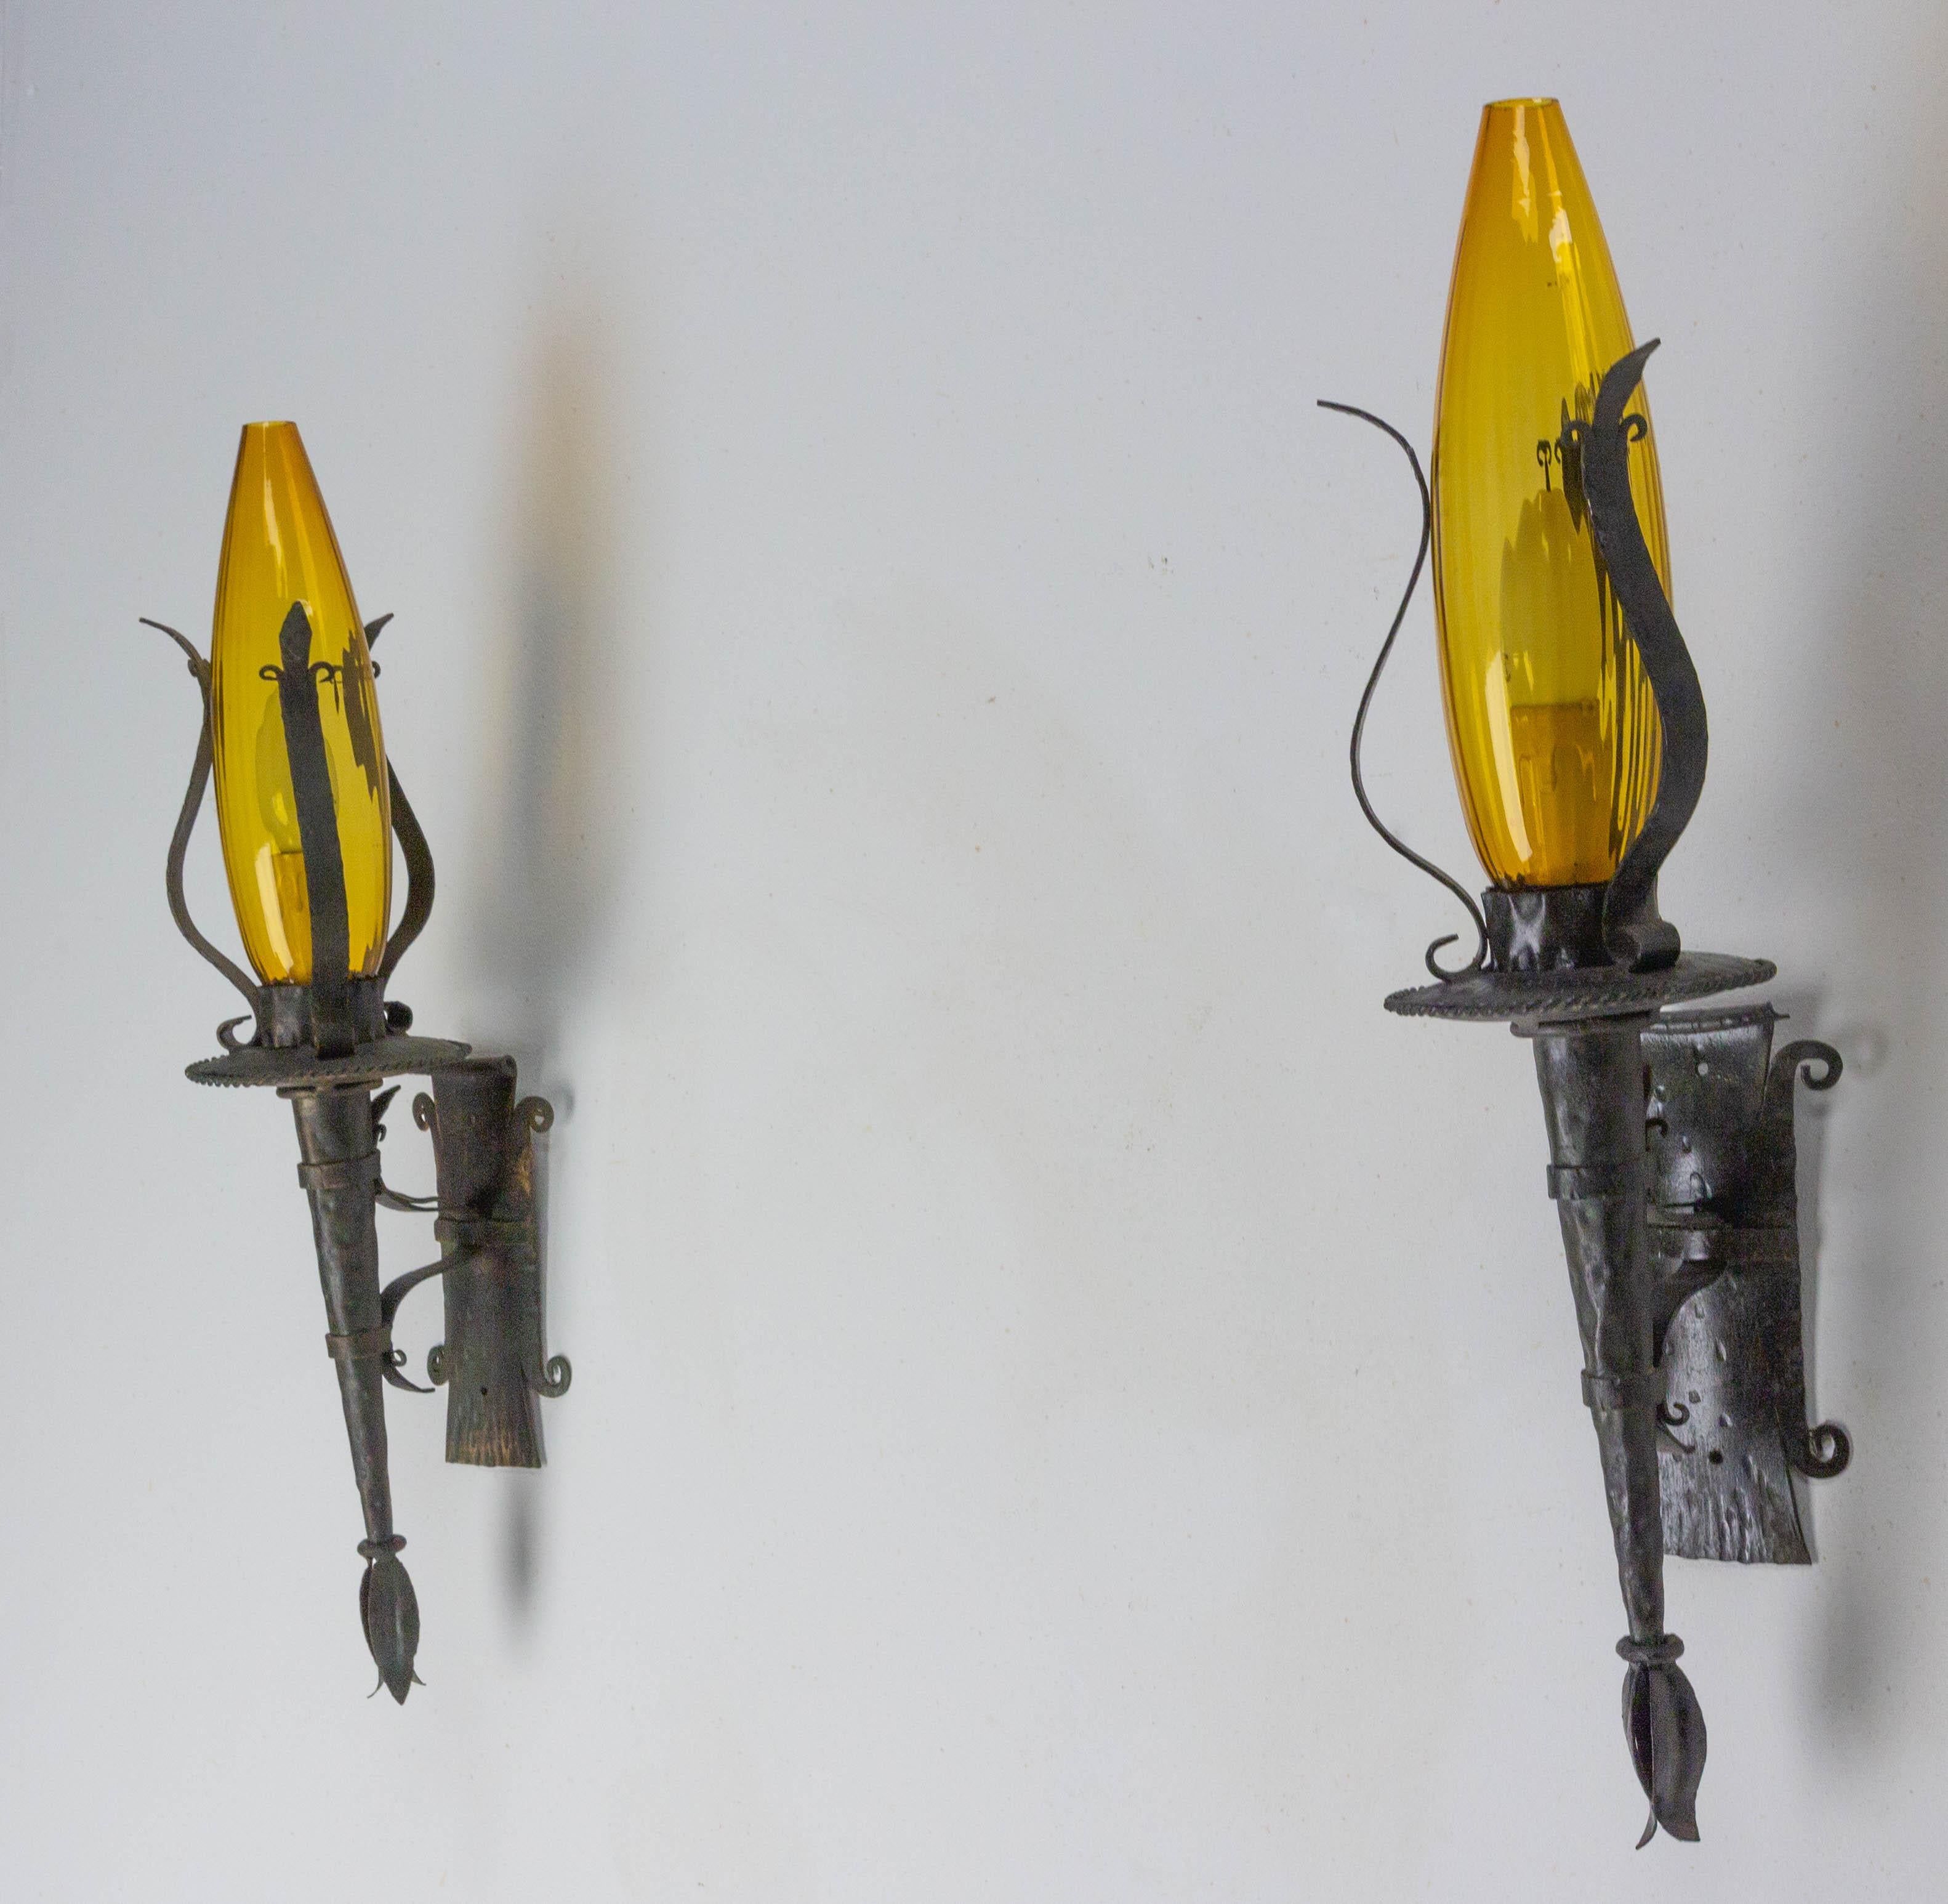 Mid-Century Modern Outdoor Pair of Sconces Lanterns, Amber Glass and Wrought Iron, c. 1960, France For Sale